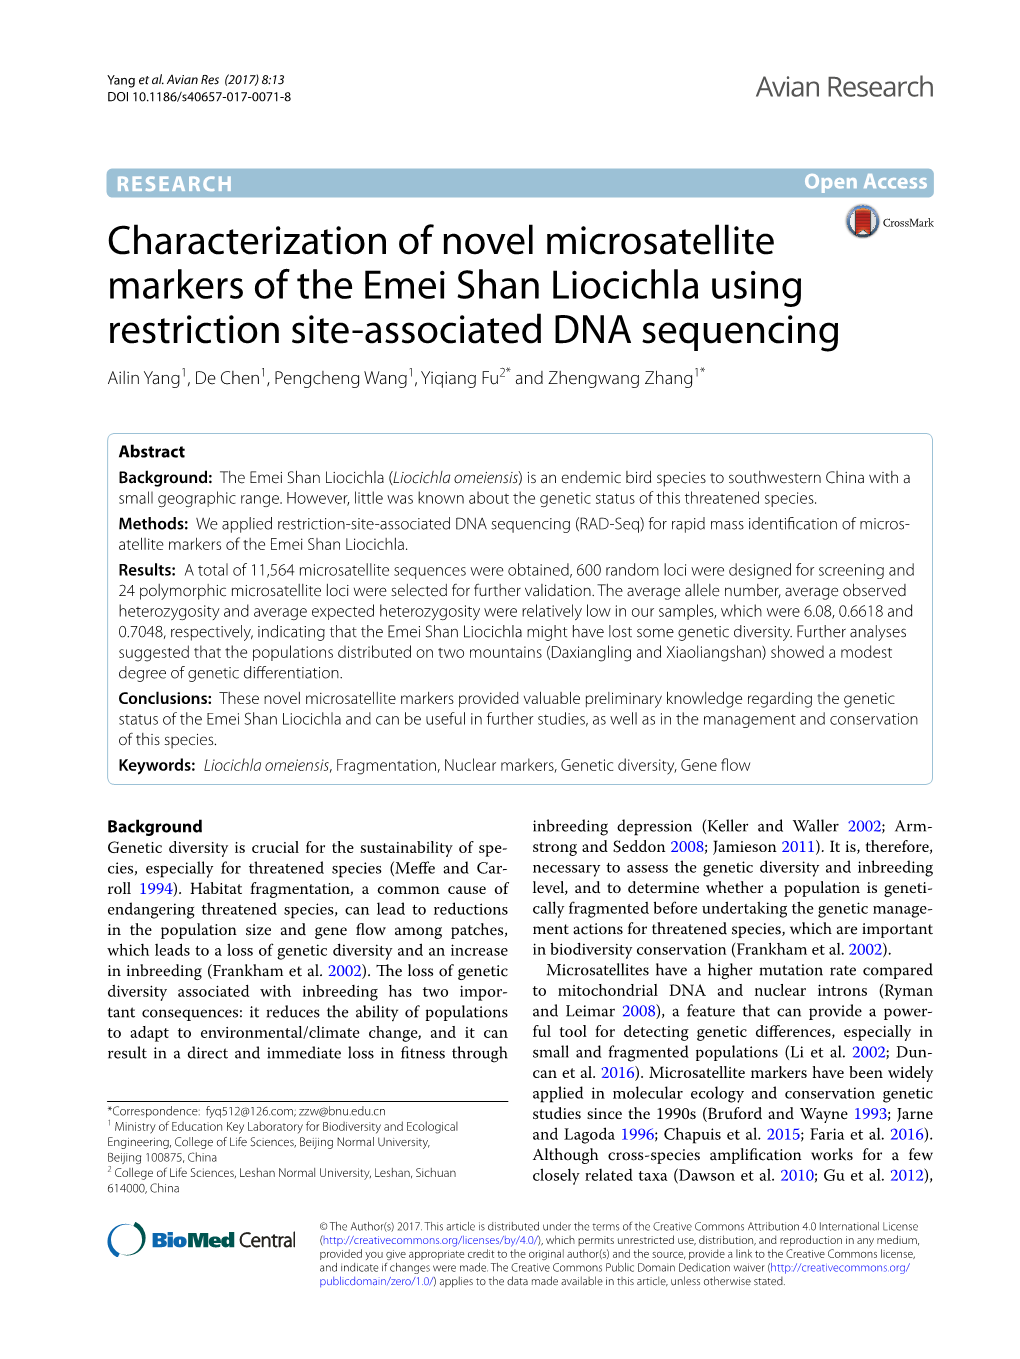 Characterization of Novel Microsatellite Markers of the Emei Shan Liocichla Using Restriction Site-Associated DNA Sequencing